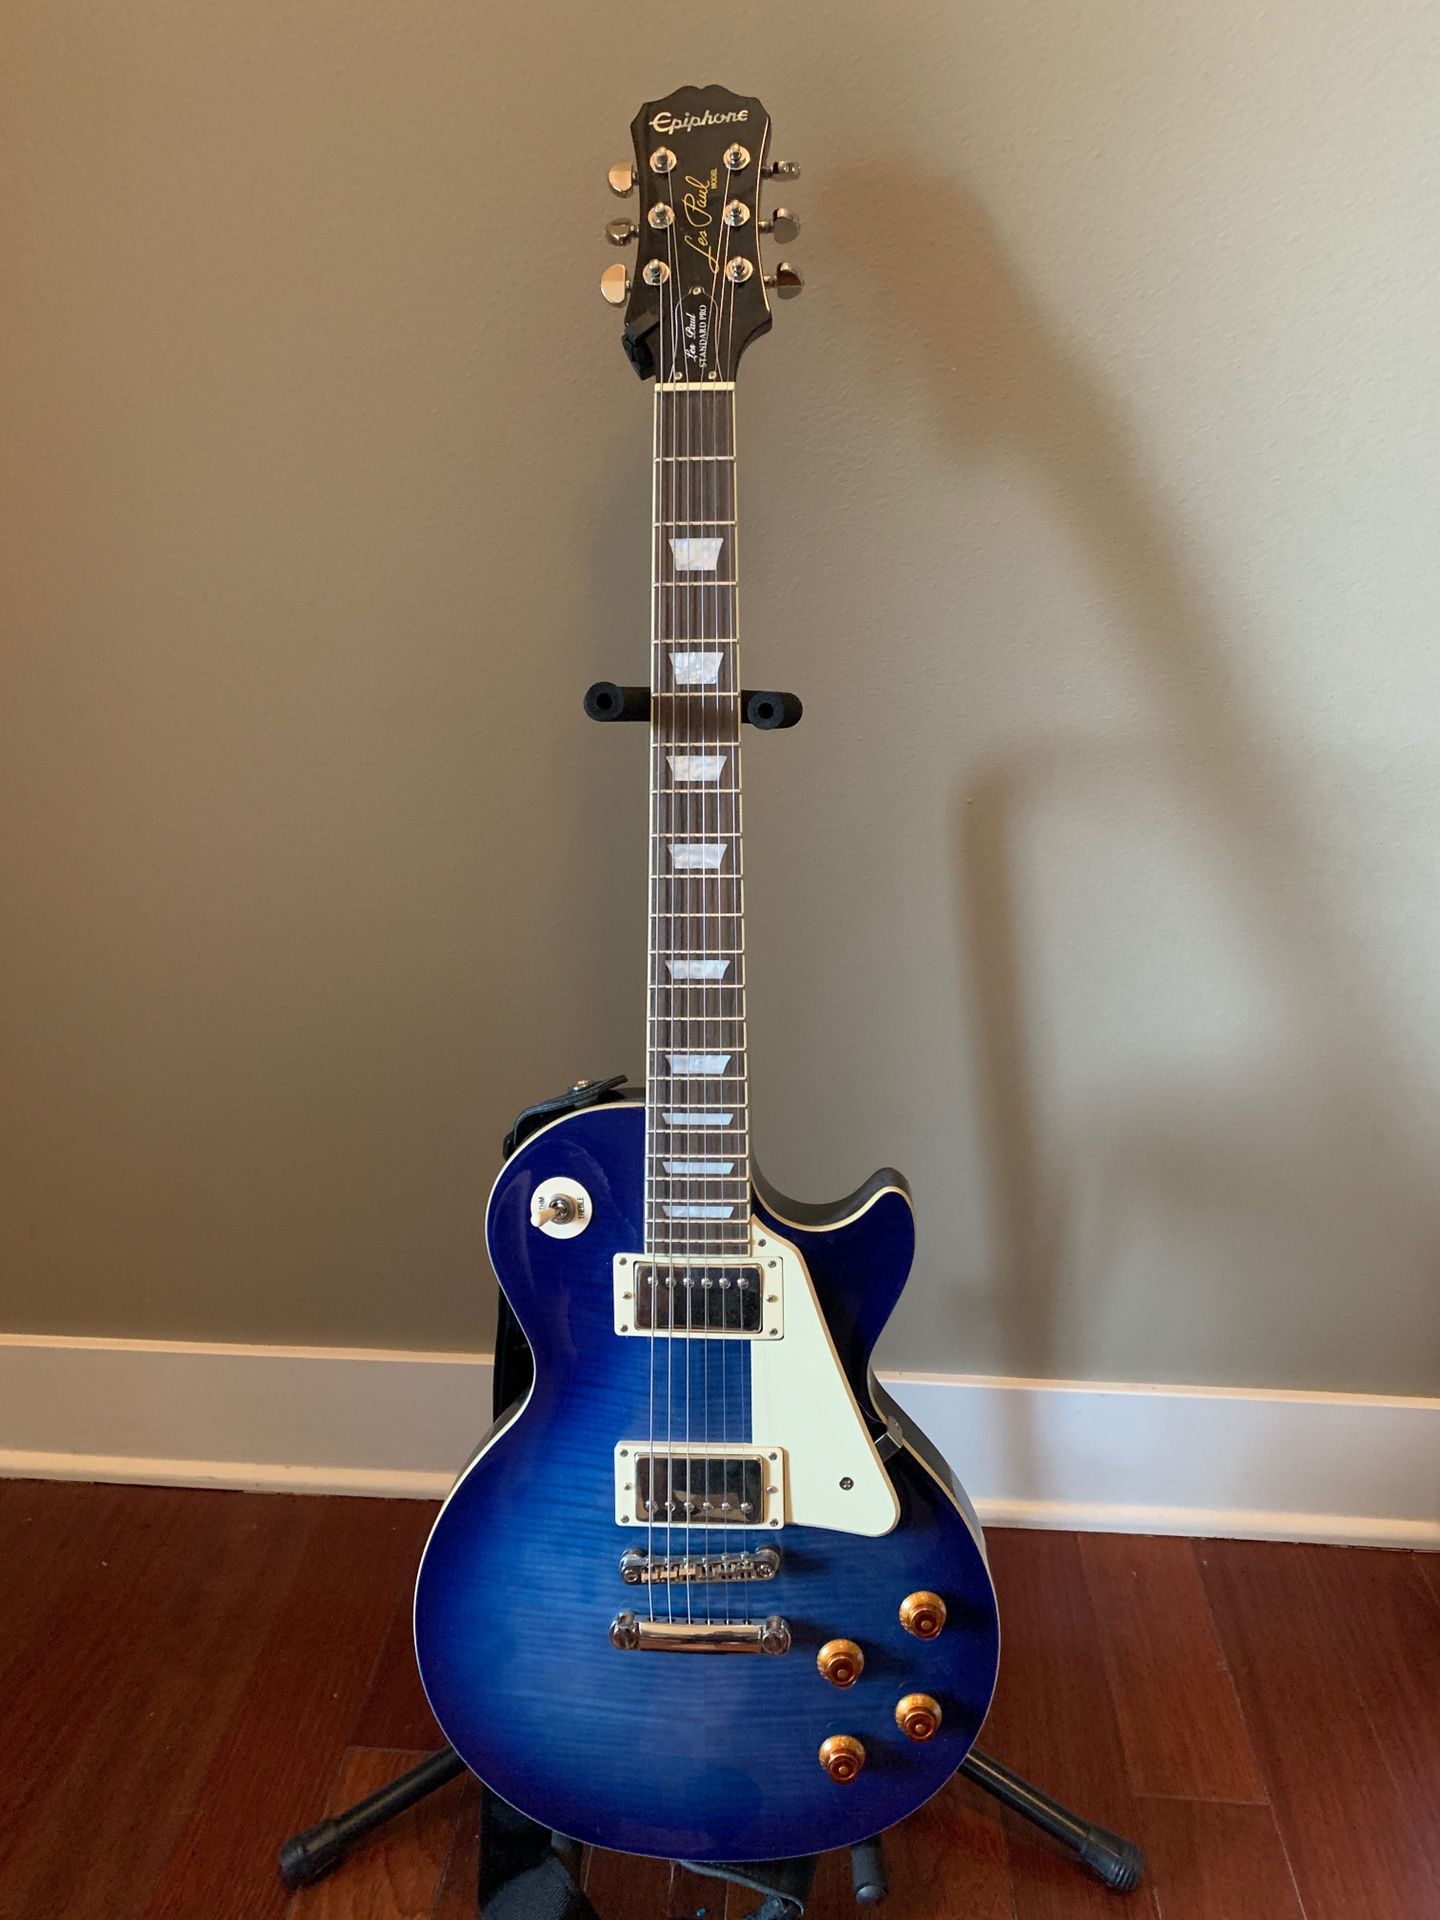 Les Paul epiphone guitar, stand and case - $250 OBO